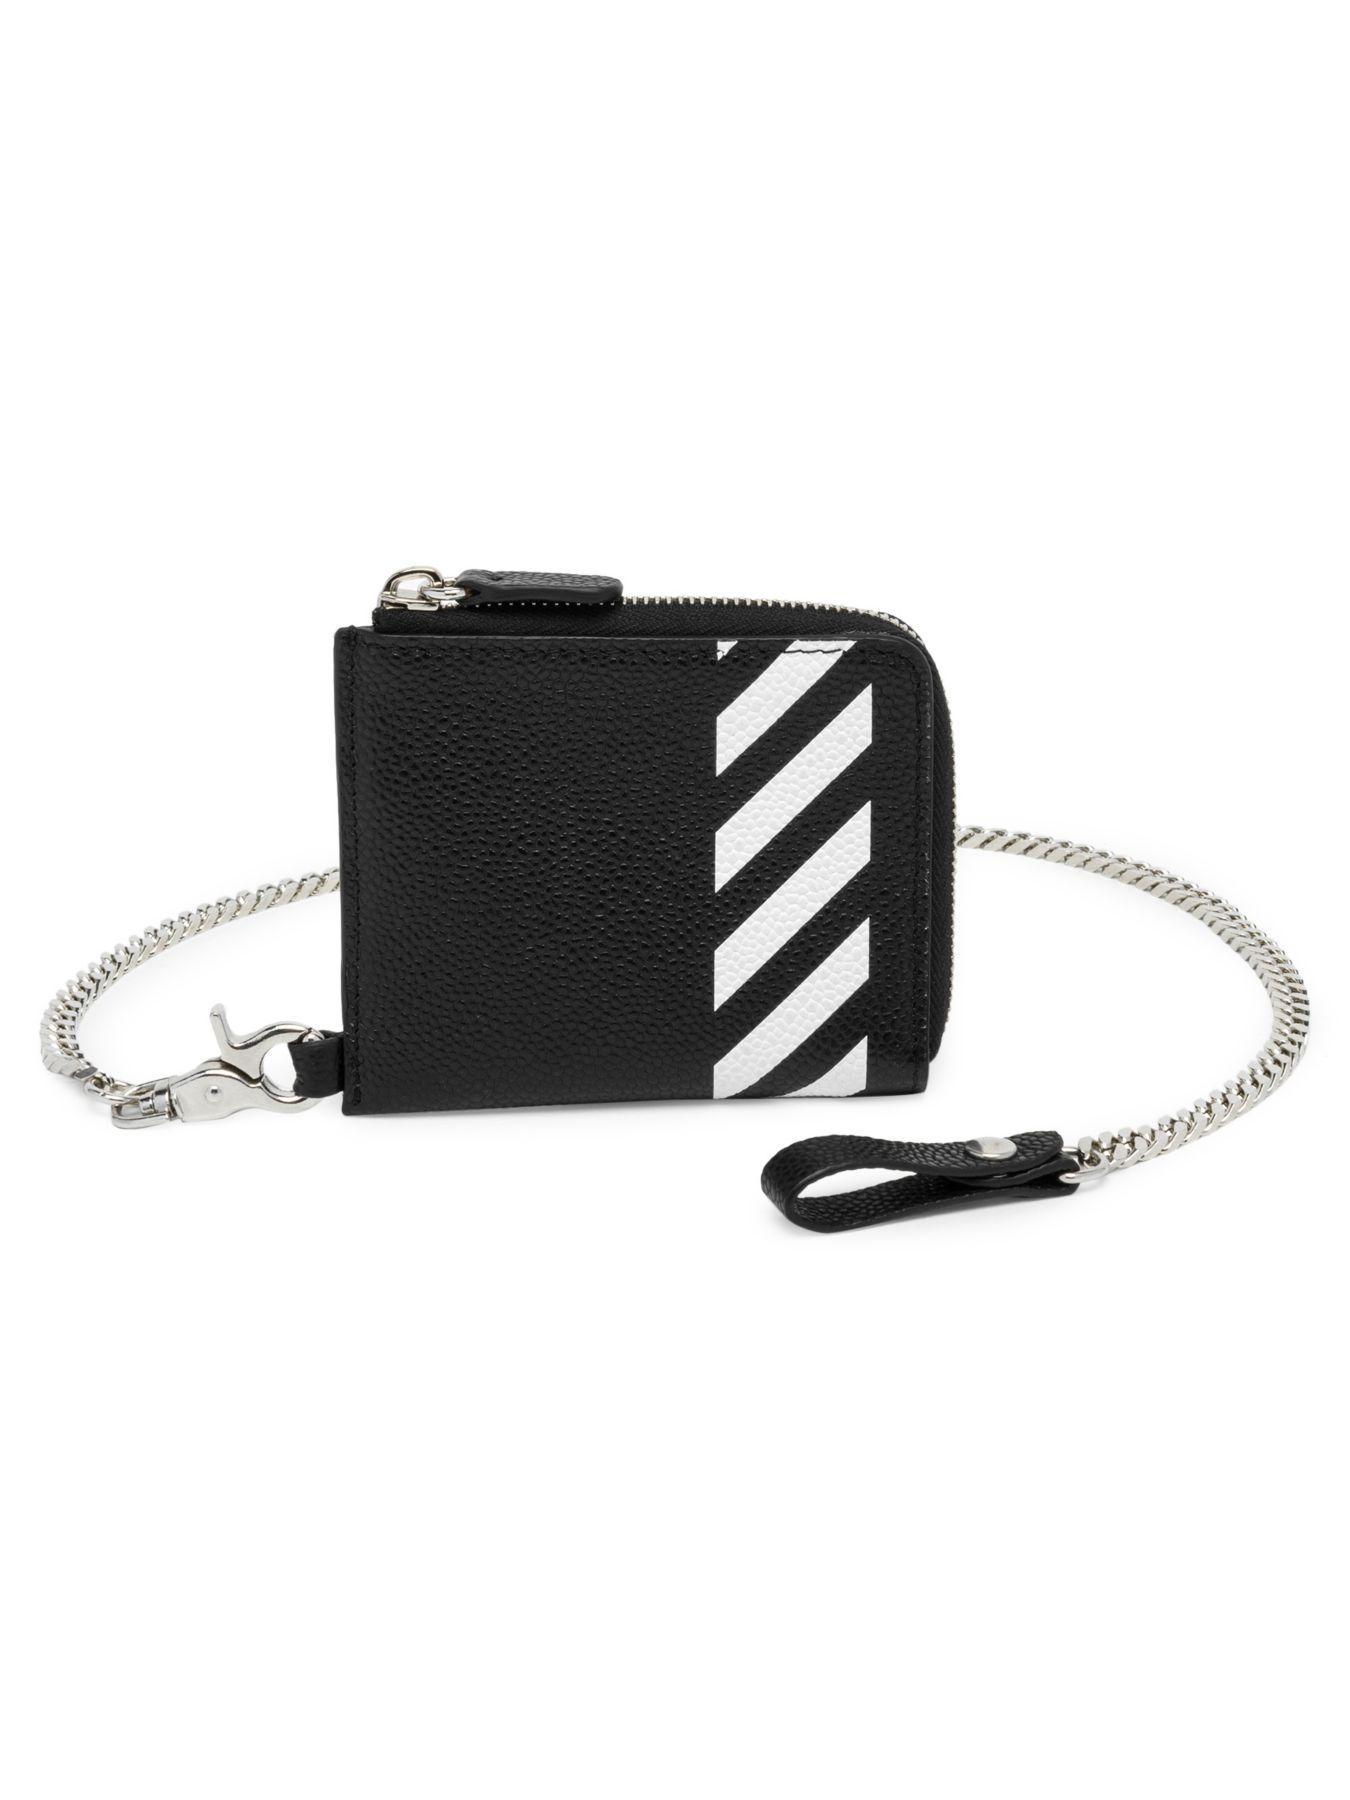 Off-White c/o Virgil Abloh Diagonal Chain Leather Wallet in Black 